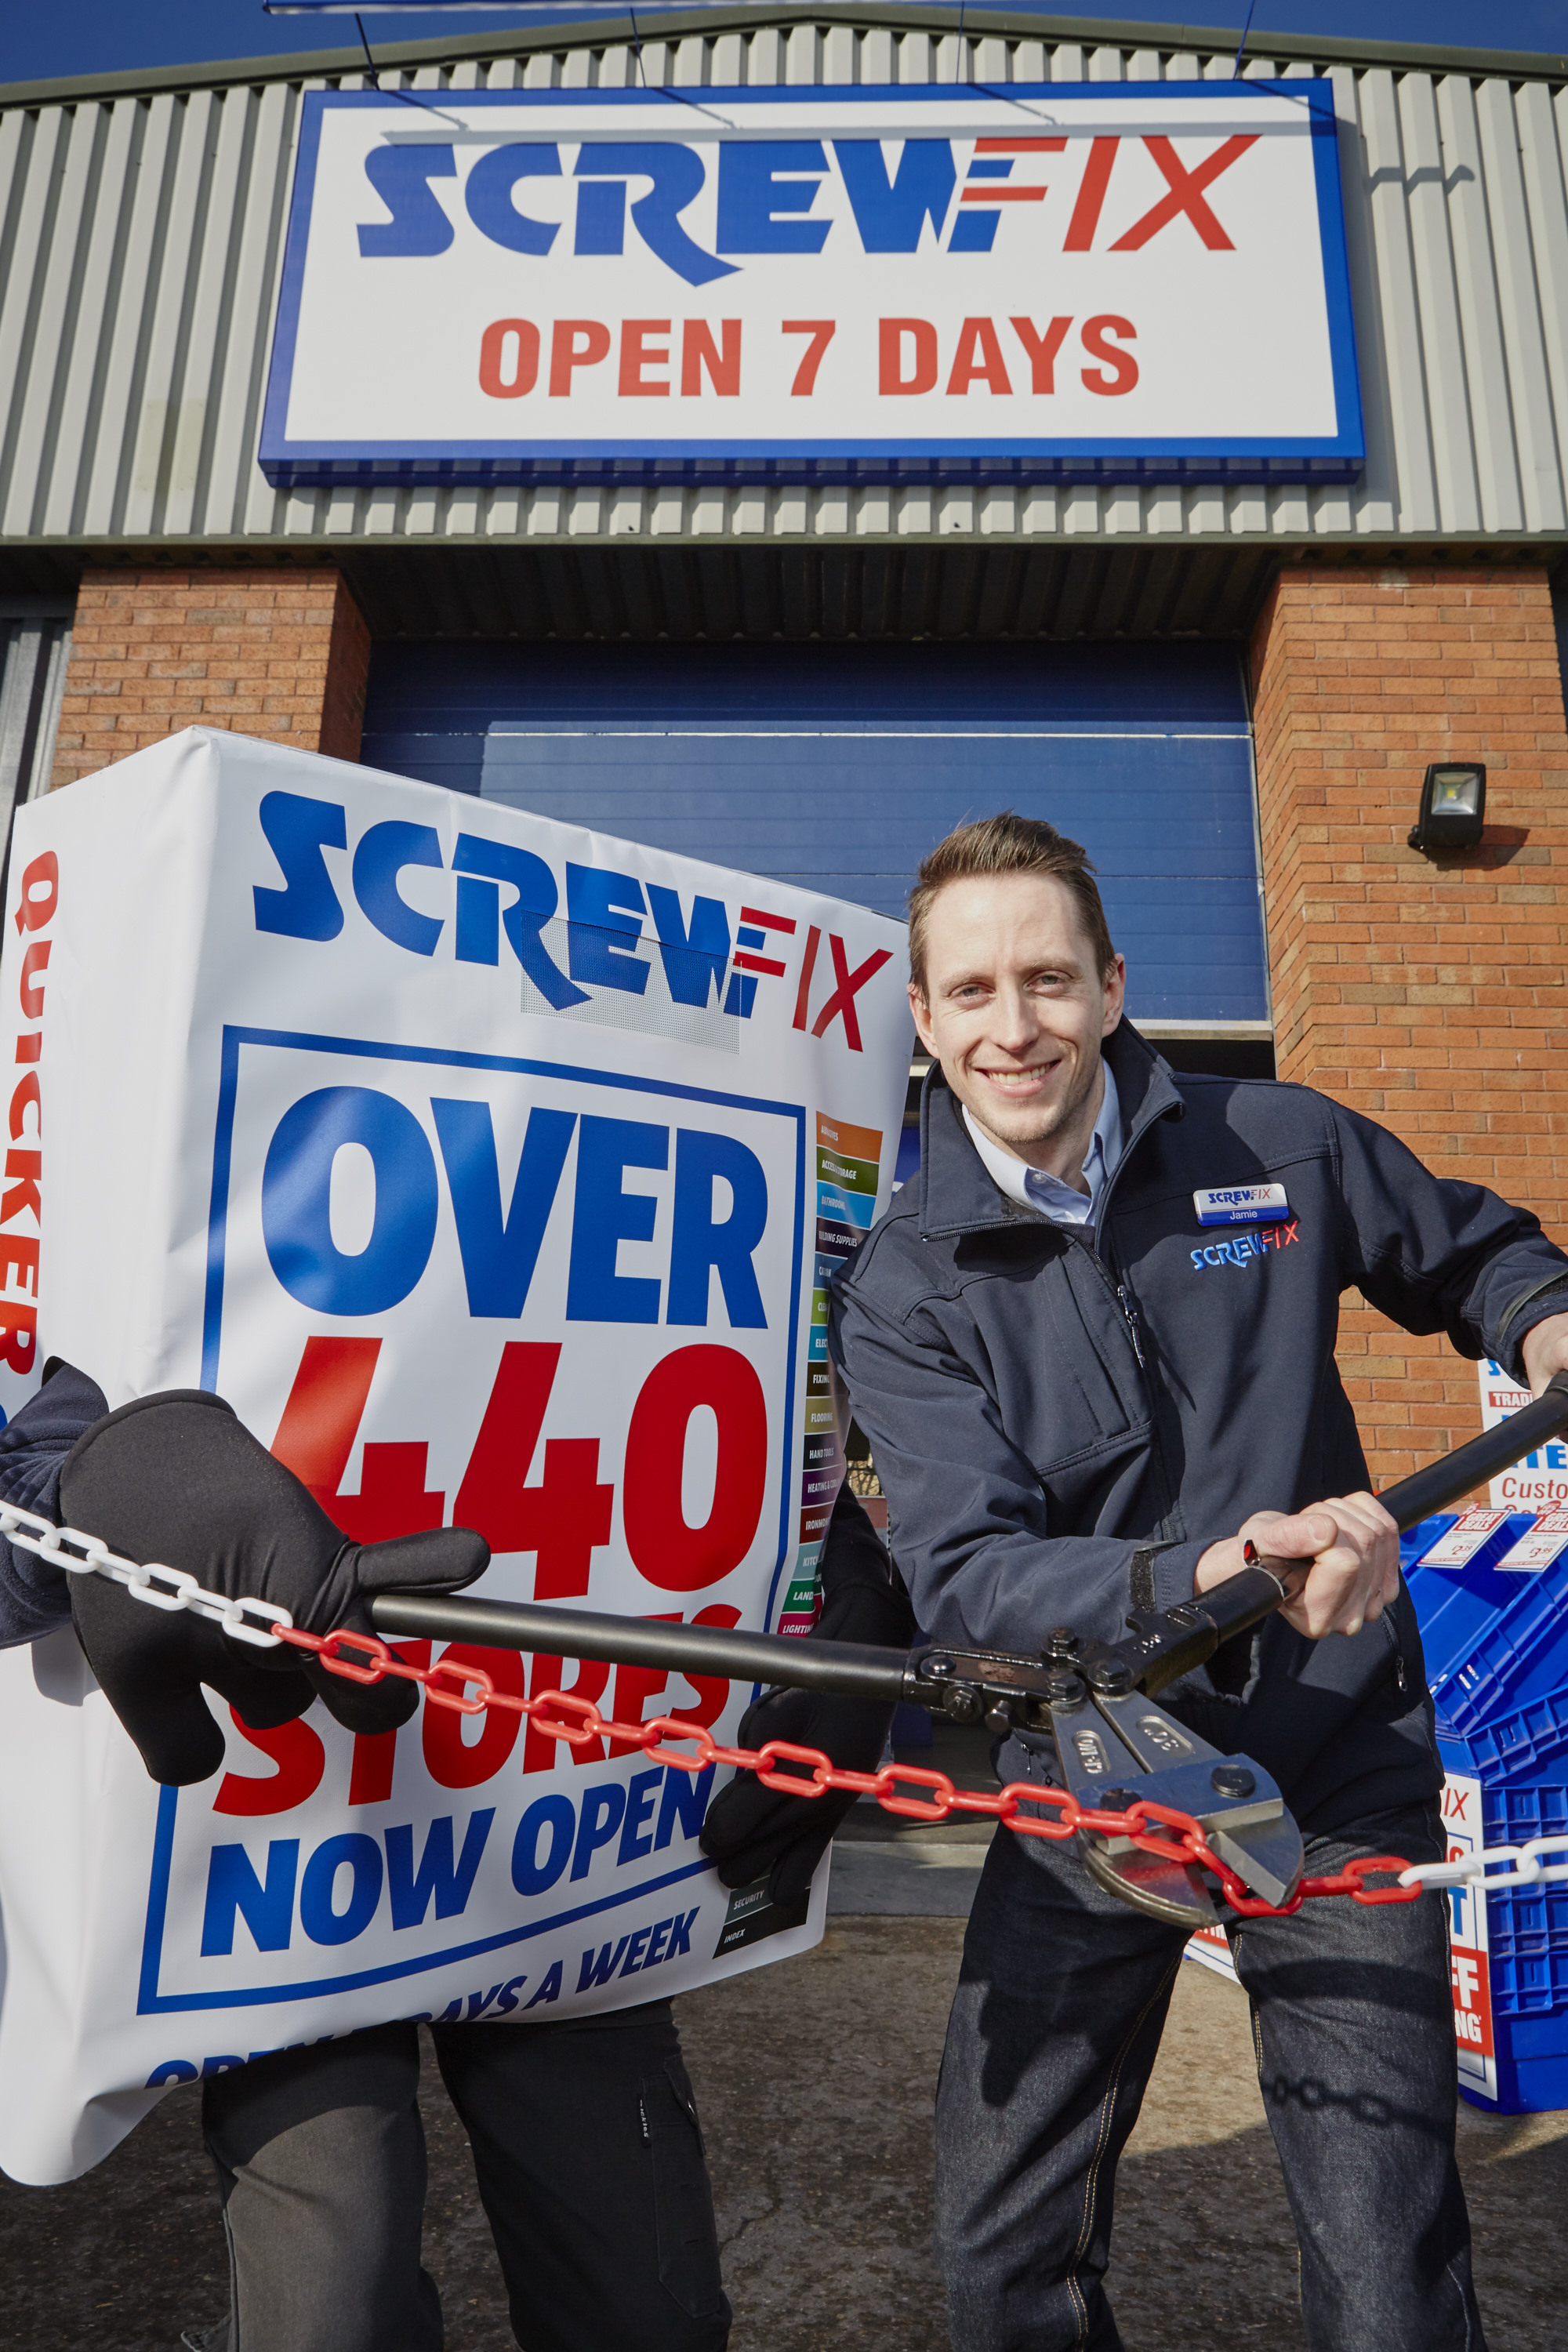 Dunstable’s first Screwfix store is declared a runaway success